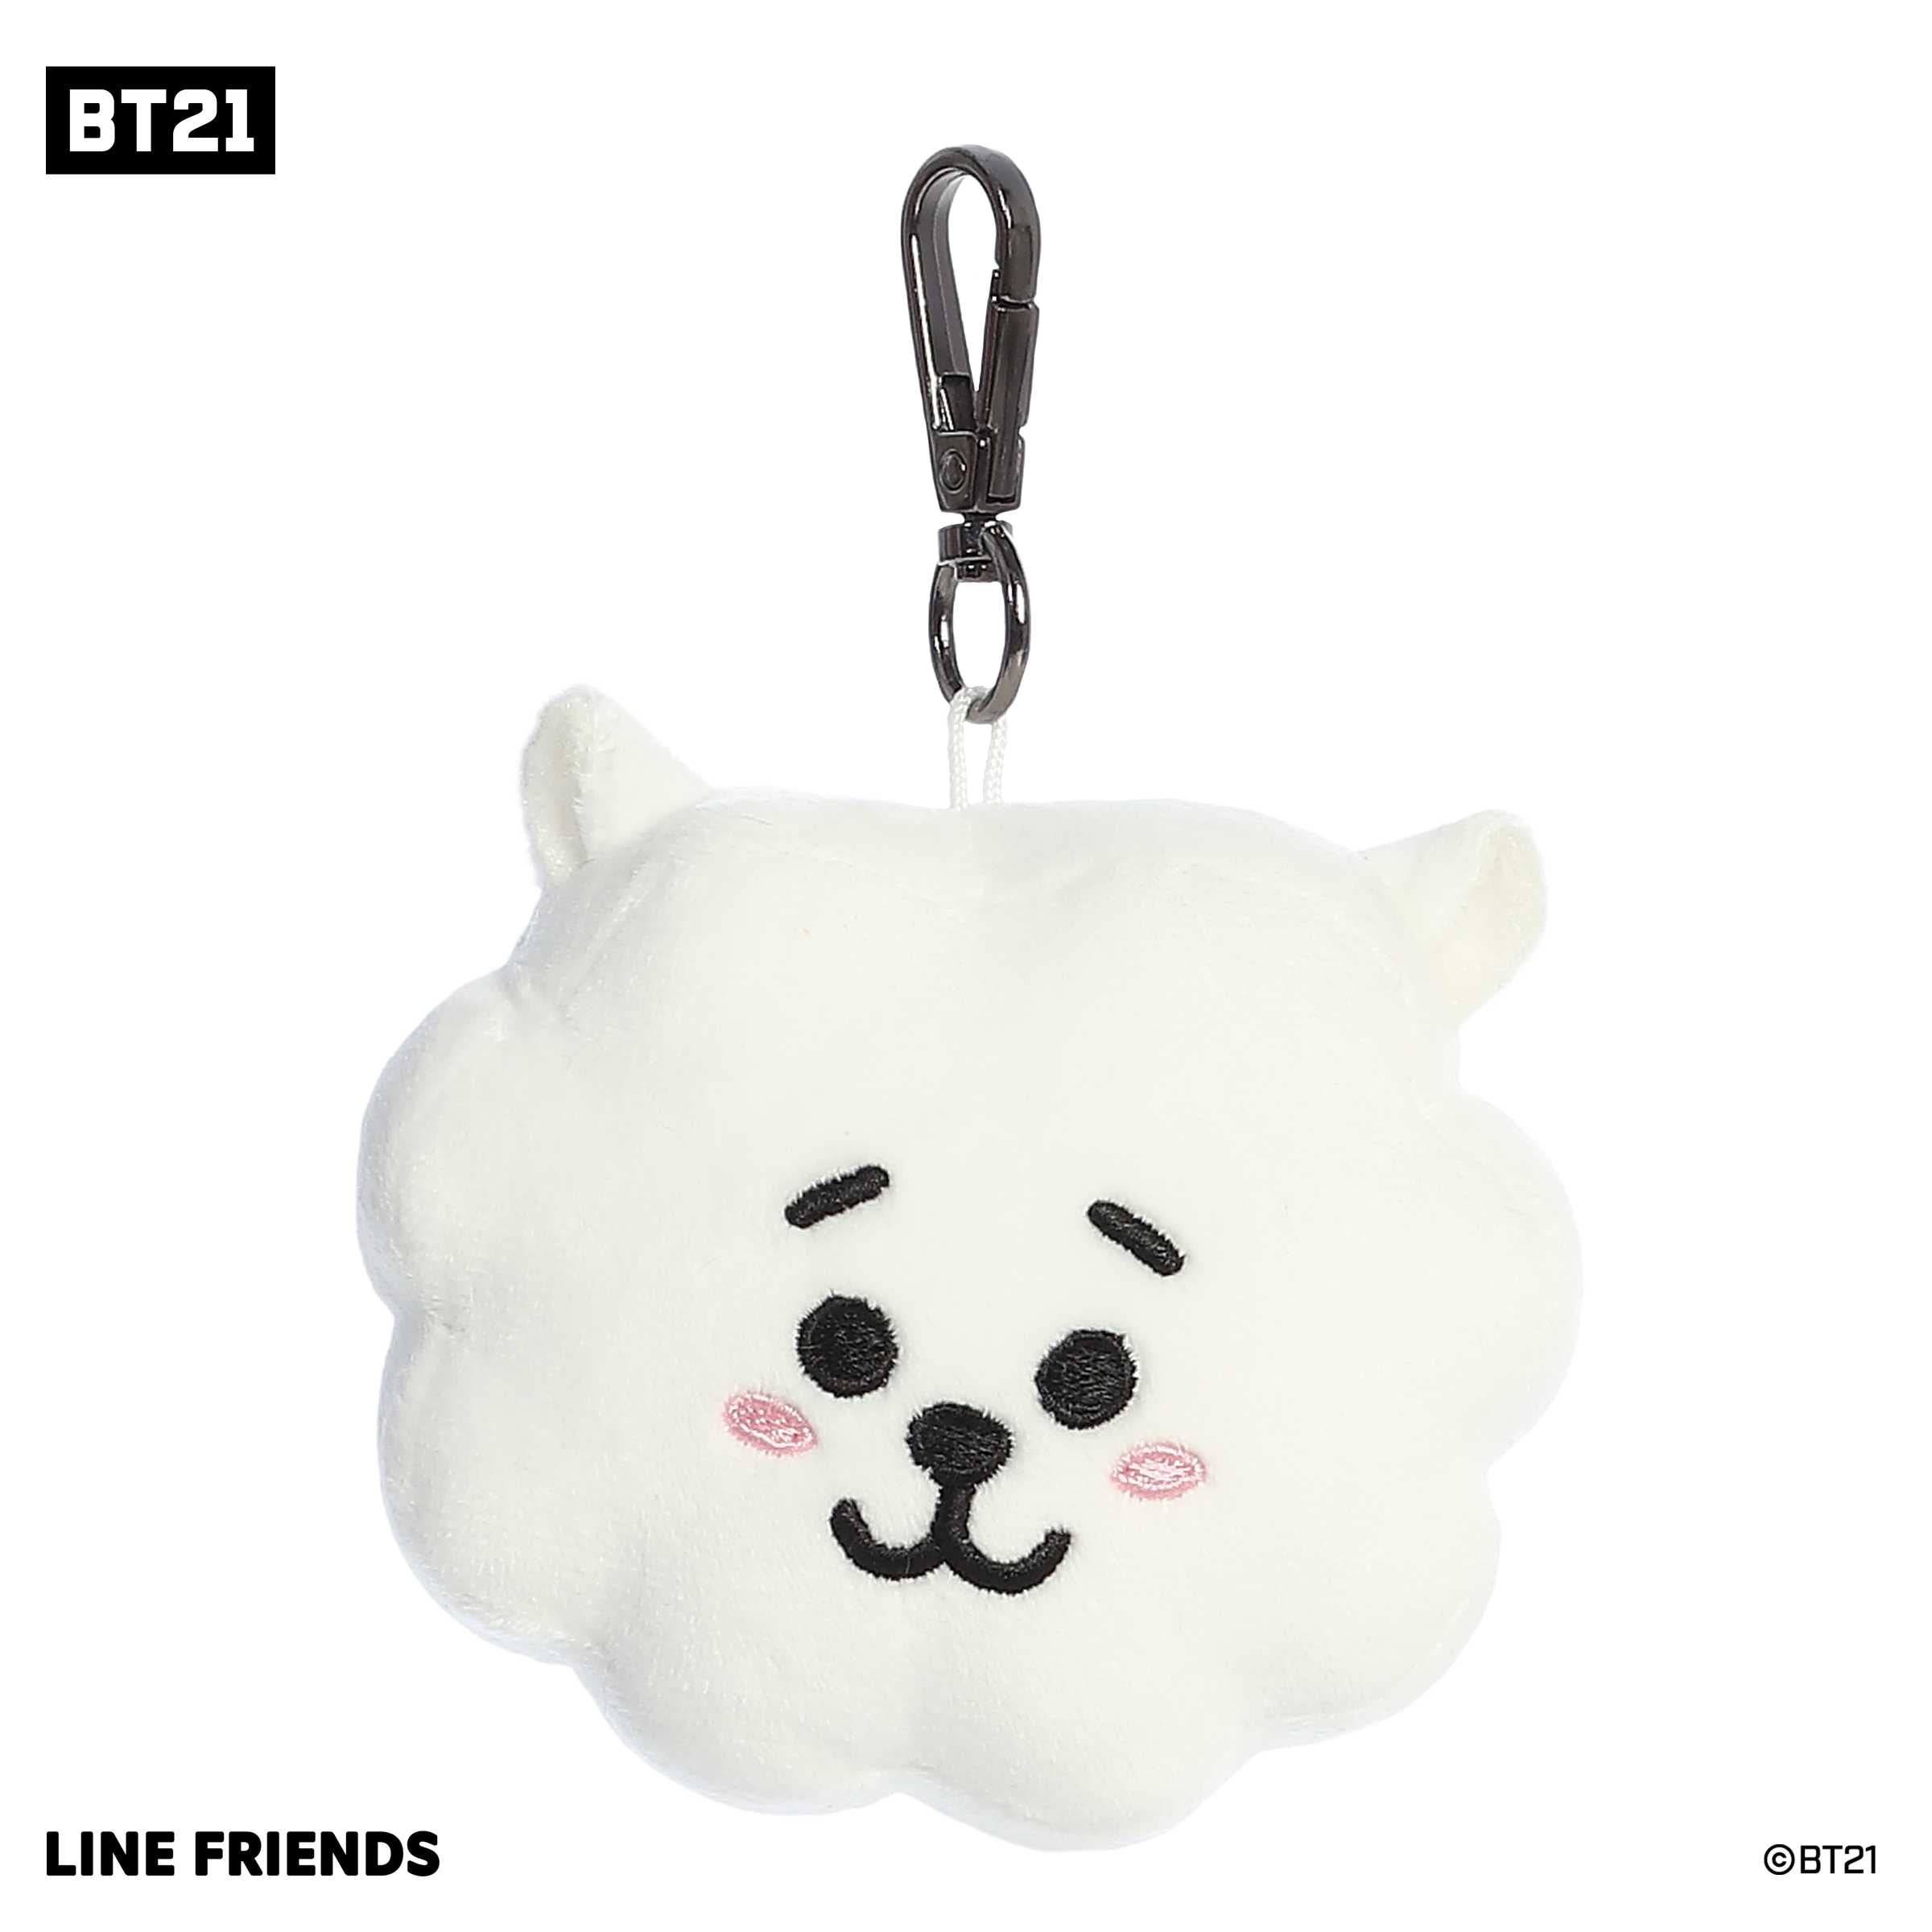 Cute BT21 plush Clip-On with a round white fluffy soft body, smiling face with black accents, and an attached metal hook